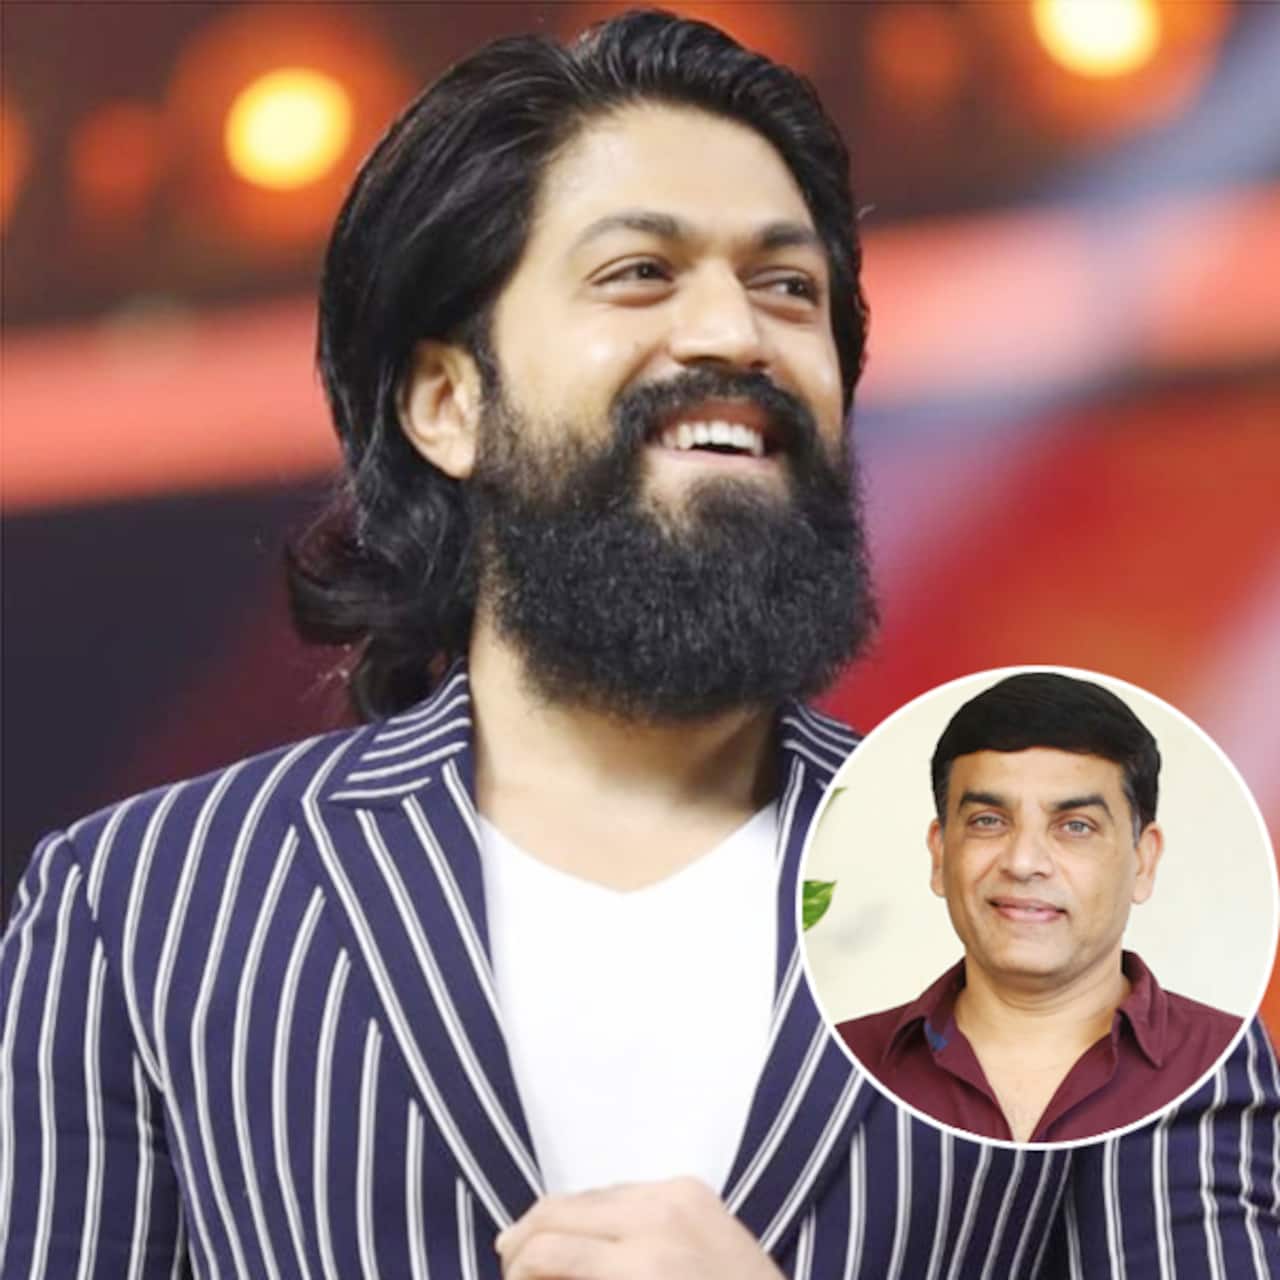 Trending South News Today: KGF 2 star Yash clicks picture with 700 fans, Dil Raju reacts to trolls comparing Thalapathy Vijay and Ajith Kumar and more